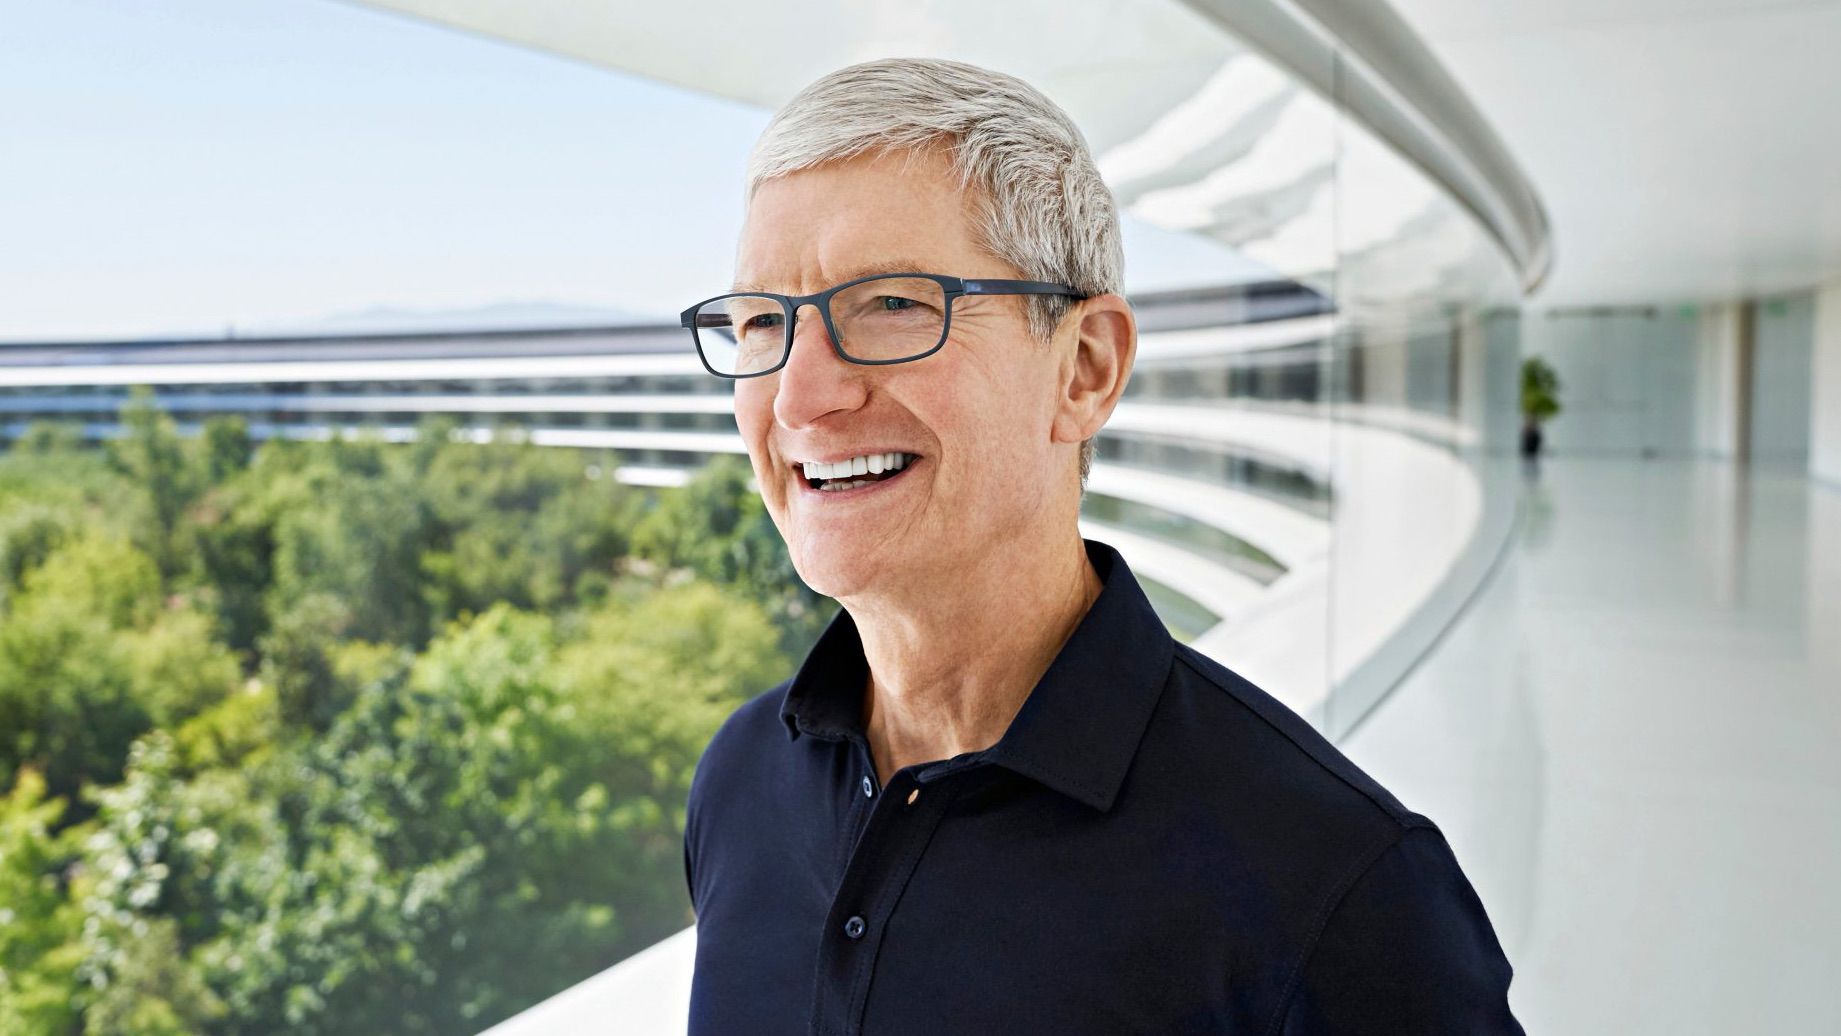 Bloomberg: Tim Cook will launch a new category of product before leaving Apple